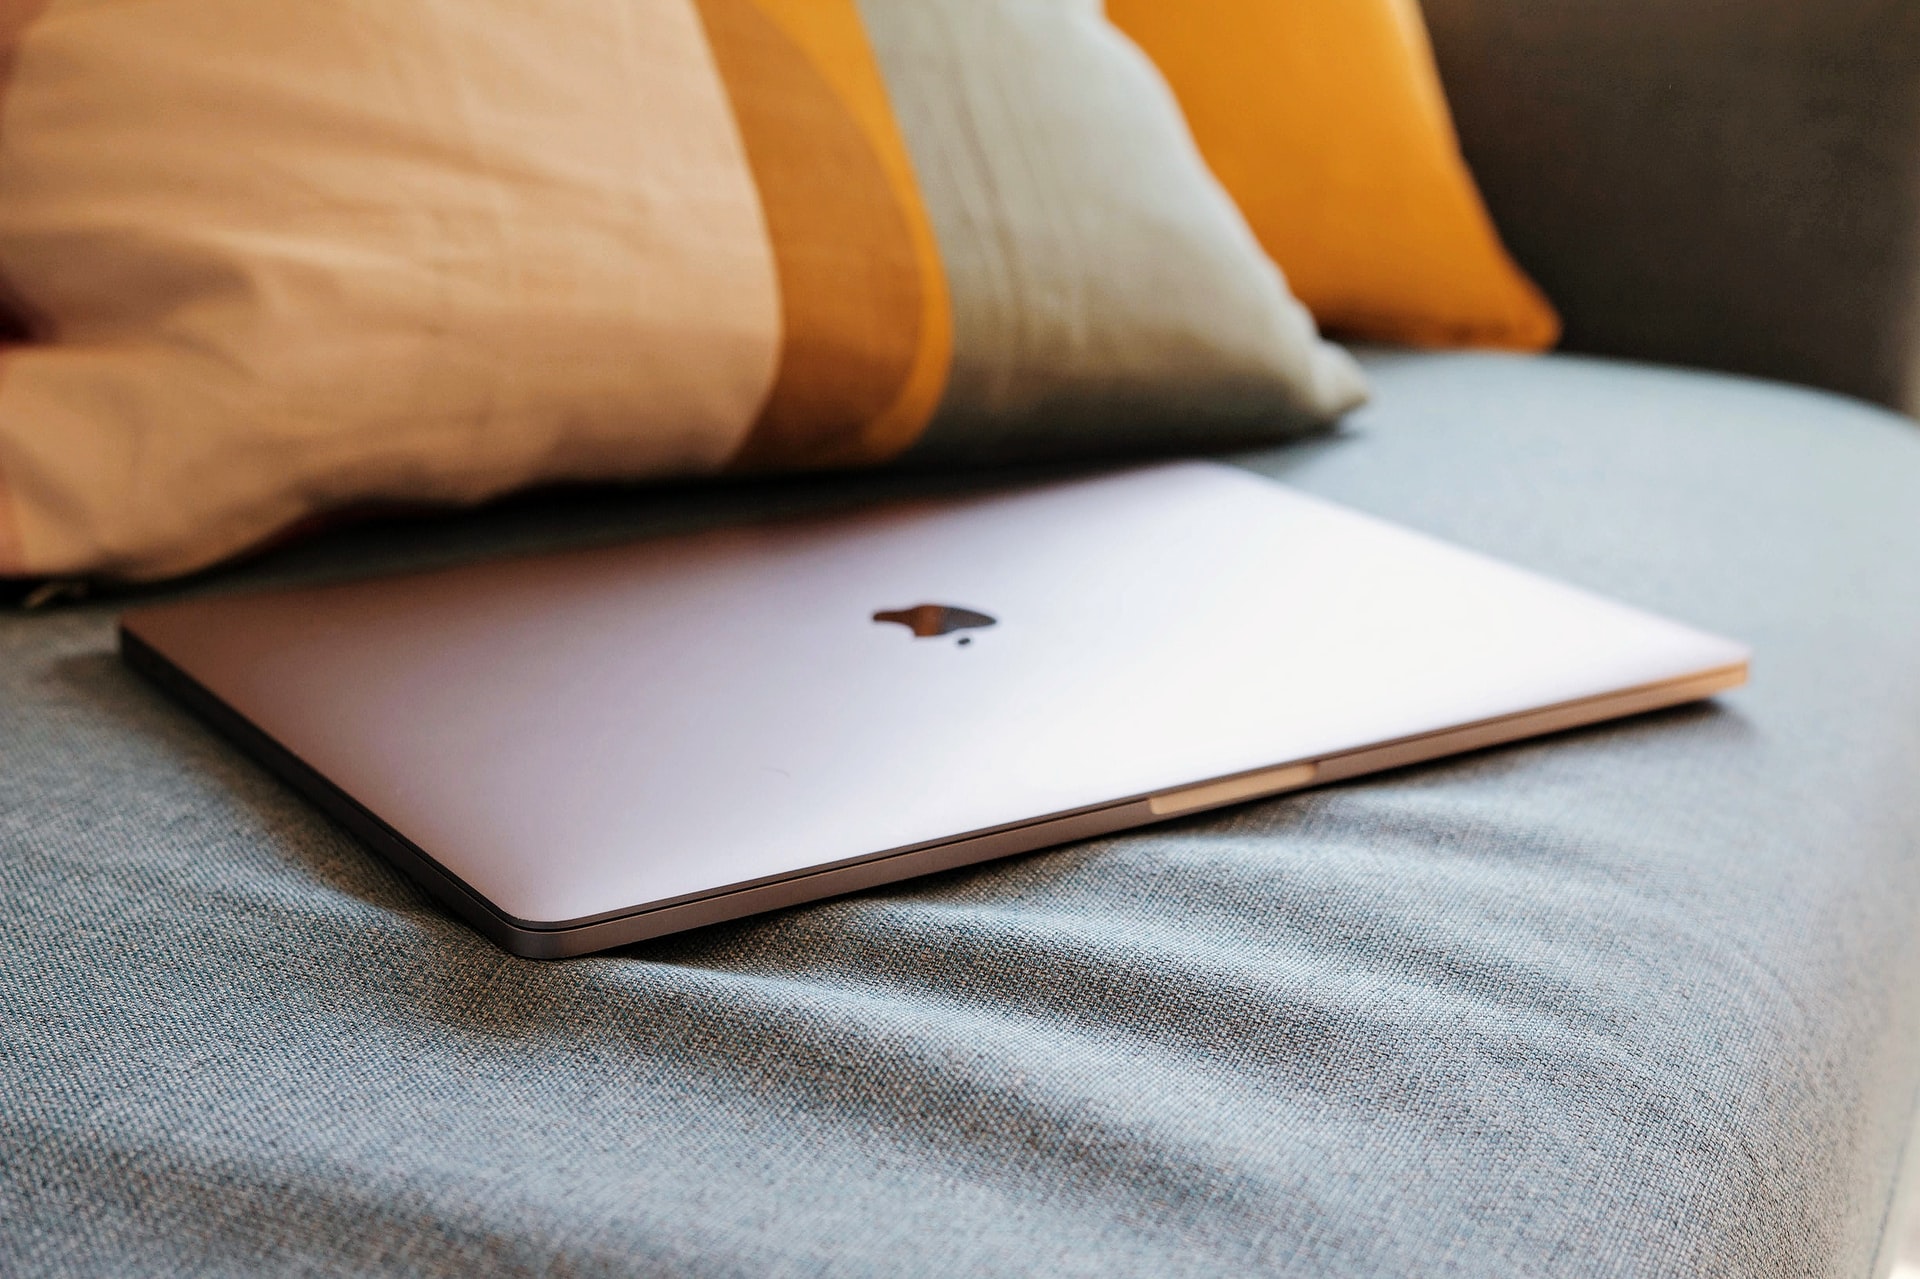 MacBook Air M1, 2020 Price and Specifications 